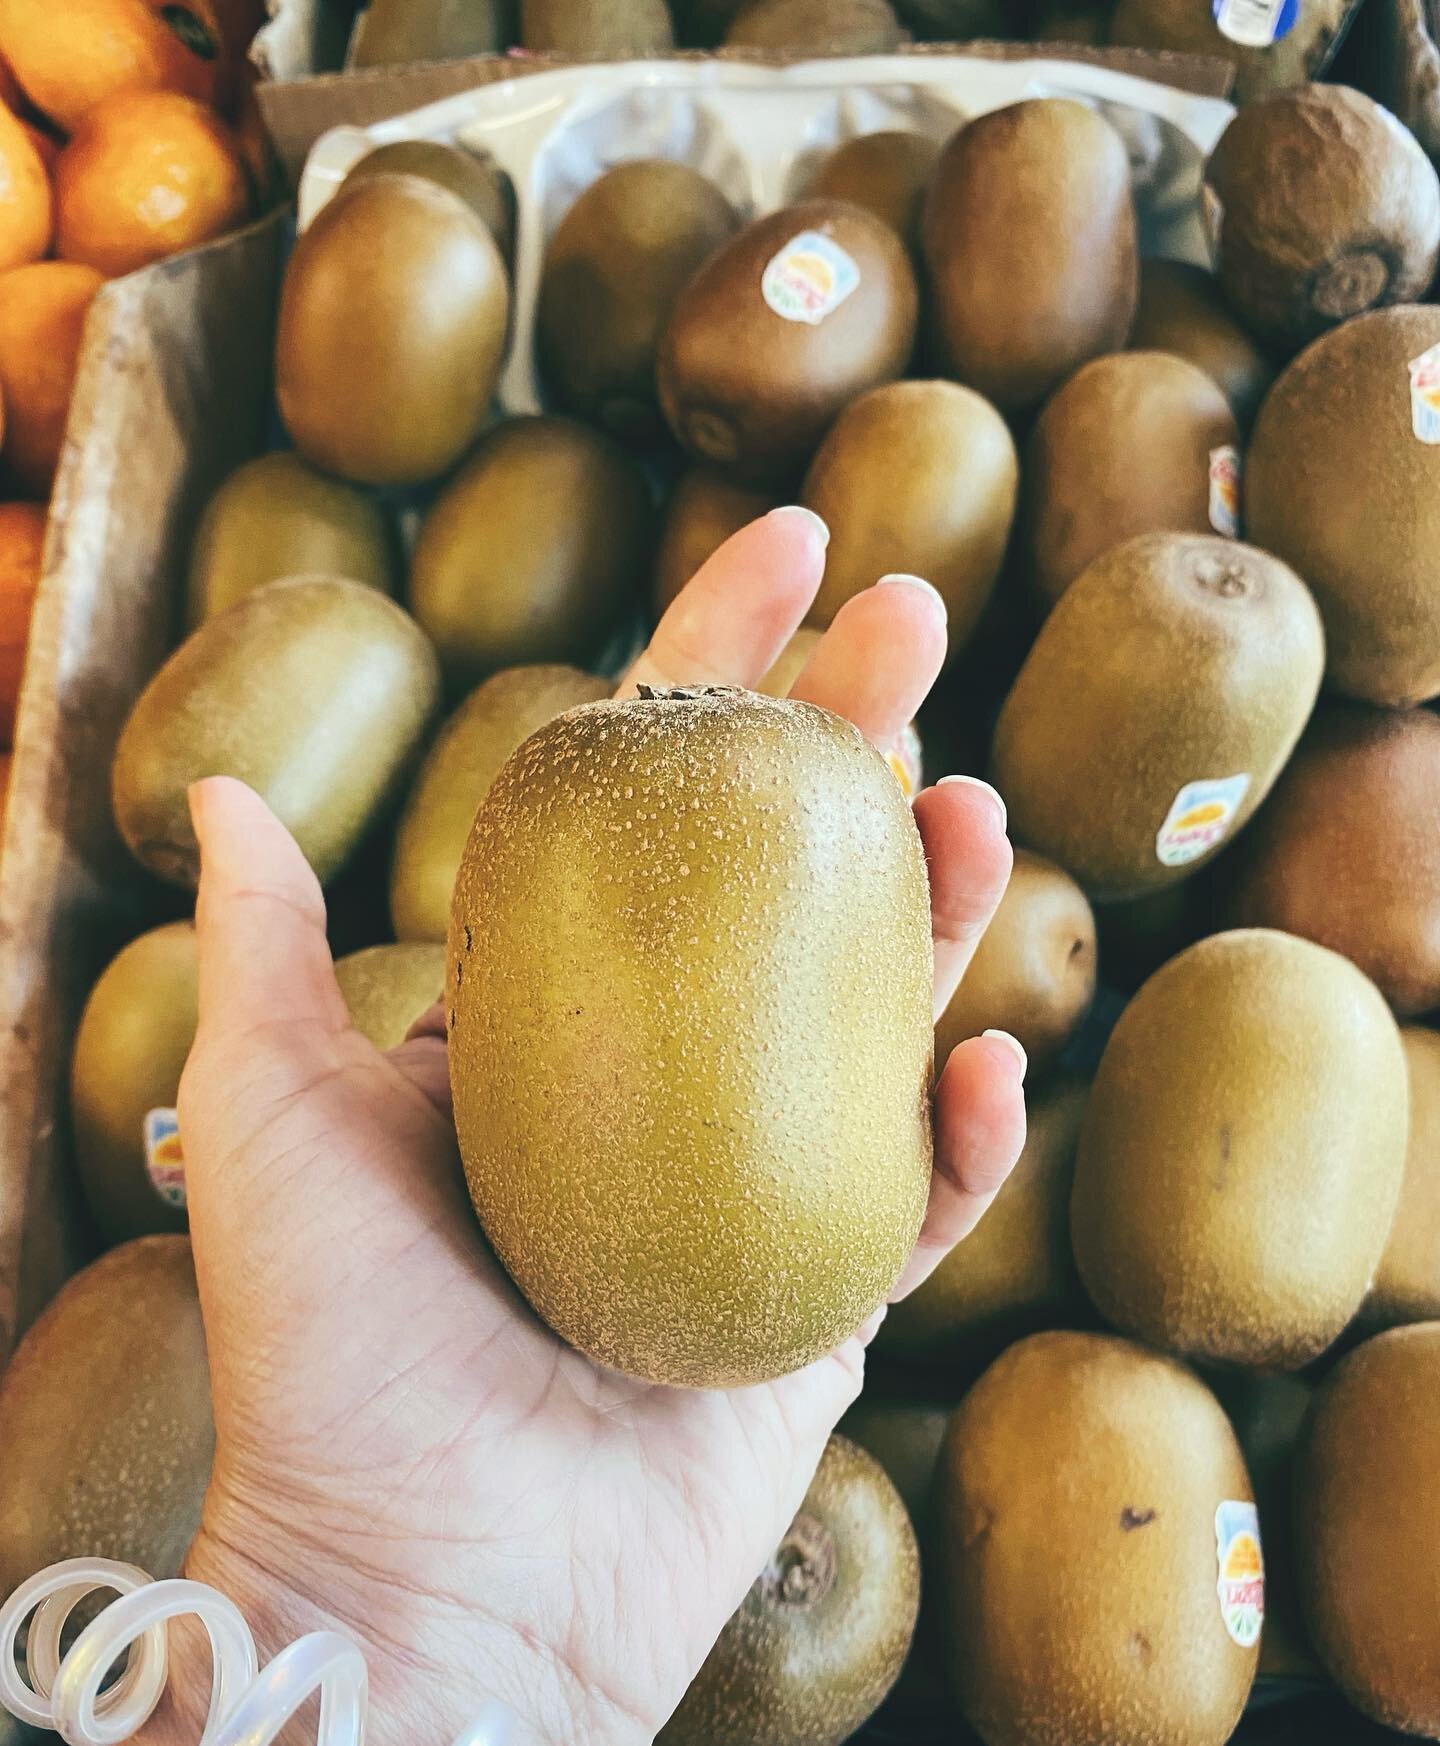 Have you tried golden kiwi? Wile both varieties are delicious, you&rsquo;ll find golden kiwis are 
- creamier and sweeter than it&rsquo;s tangier counterpart 
- higher vitamin C content 

Come try !
***
We're ALL ABOUT bringing the best food selectio